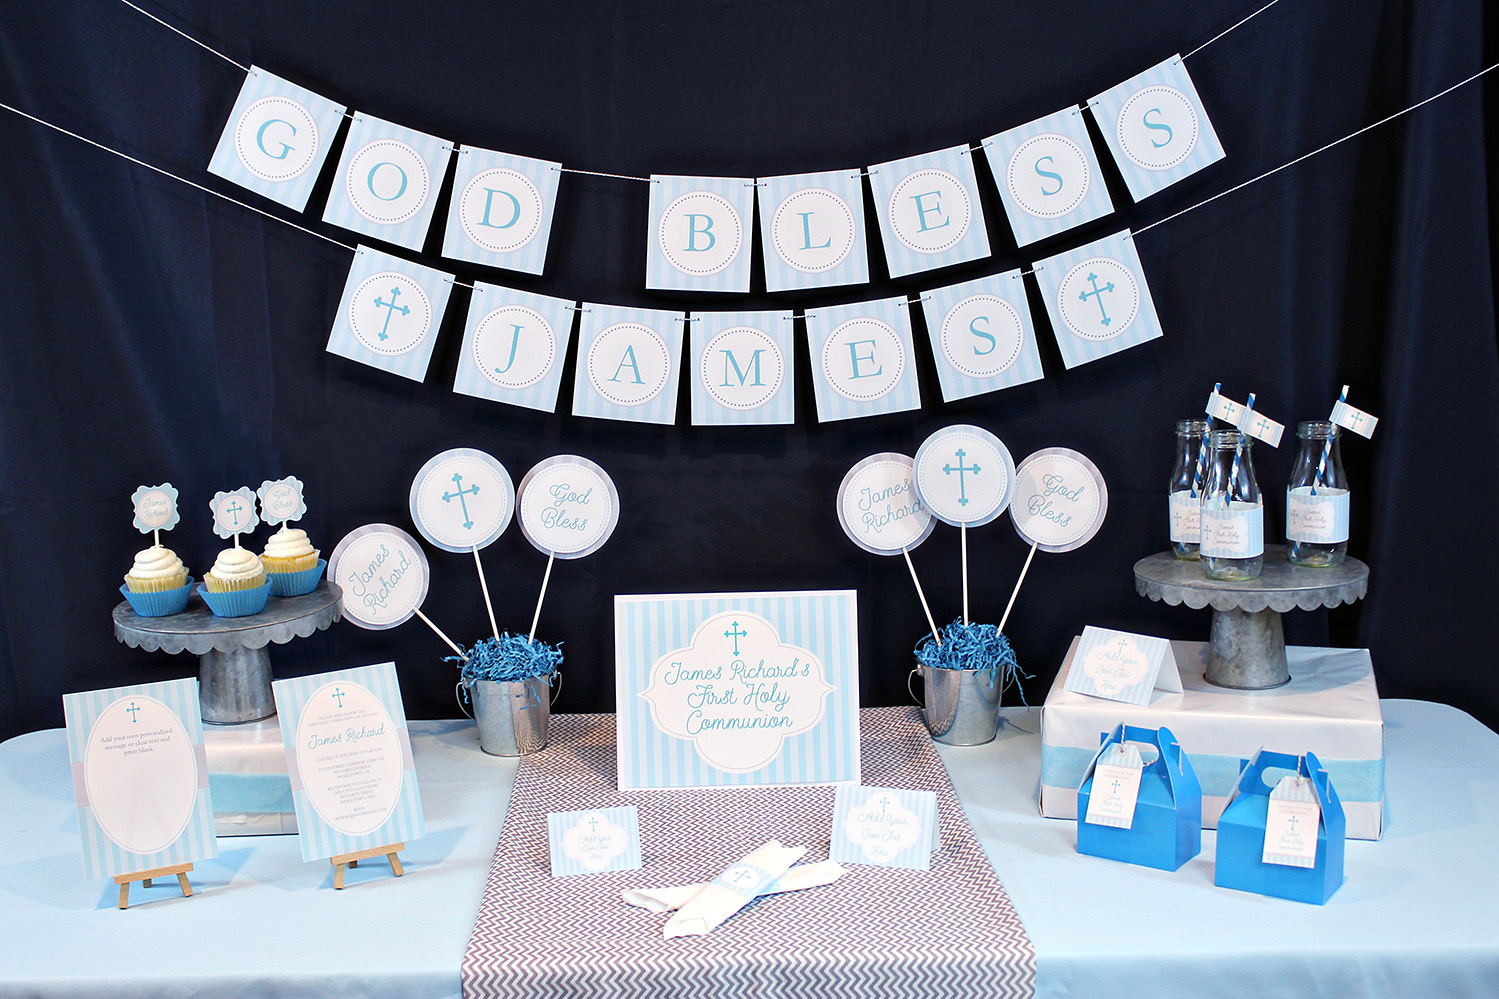 First Communion Party Decorations In Blue 505 Design Inc